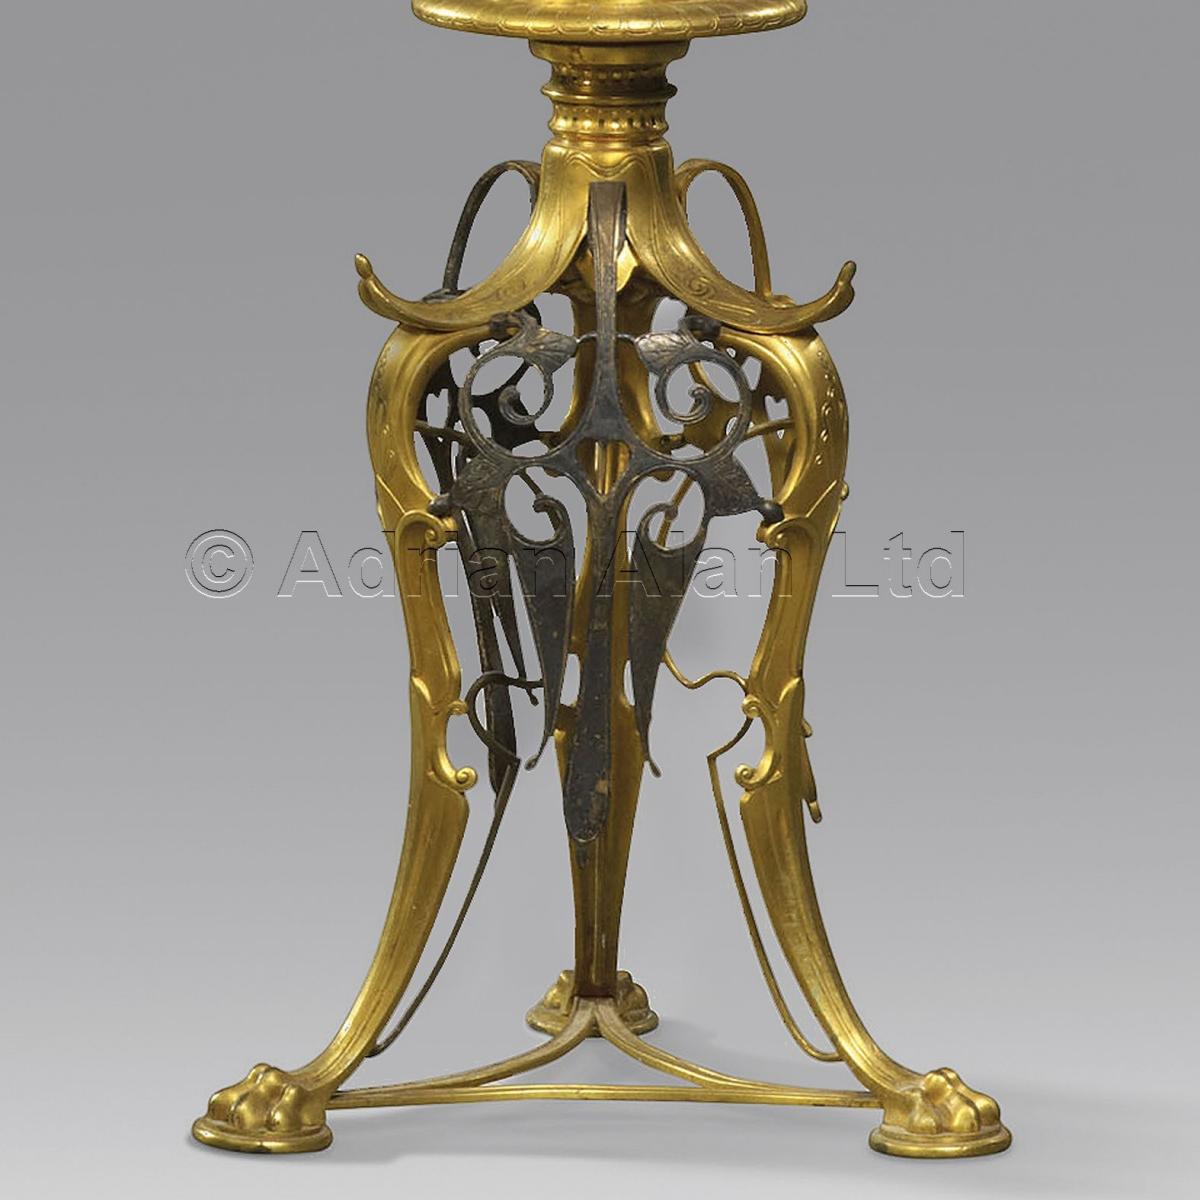 A Pair of Rare 'Neo-Grec' Bronze Torchère Stands, Attributed to Ferdinand Barbedienne